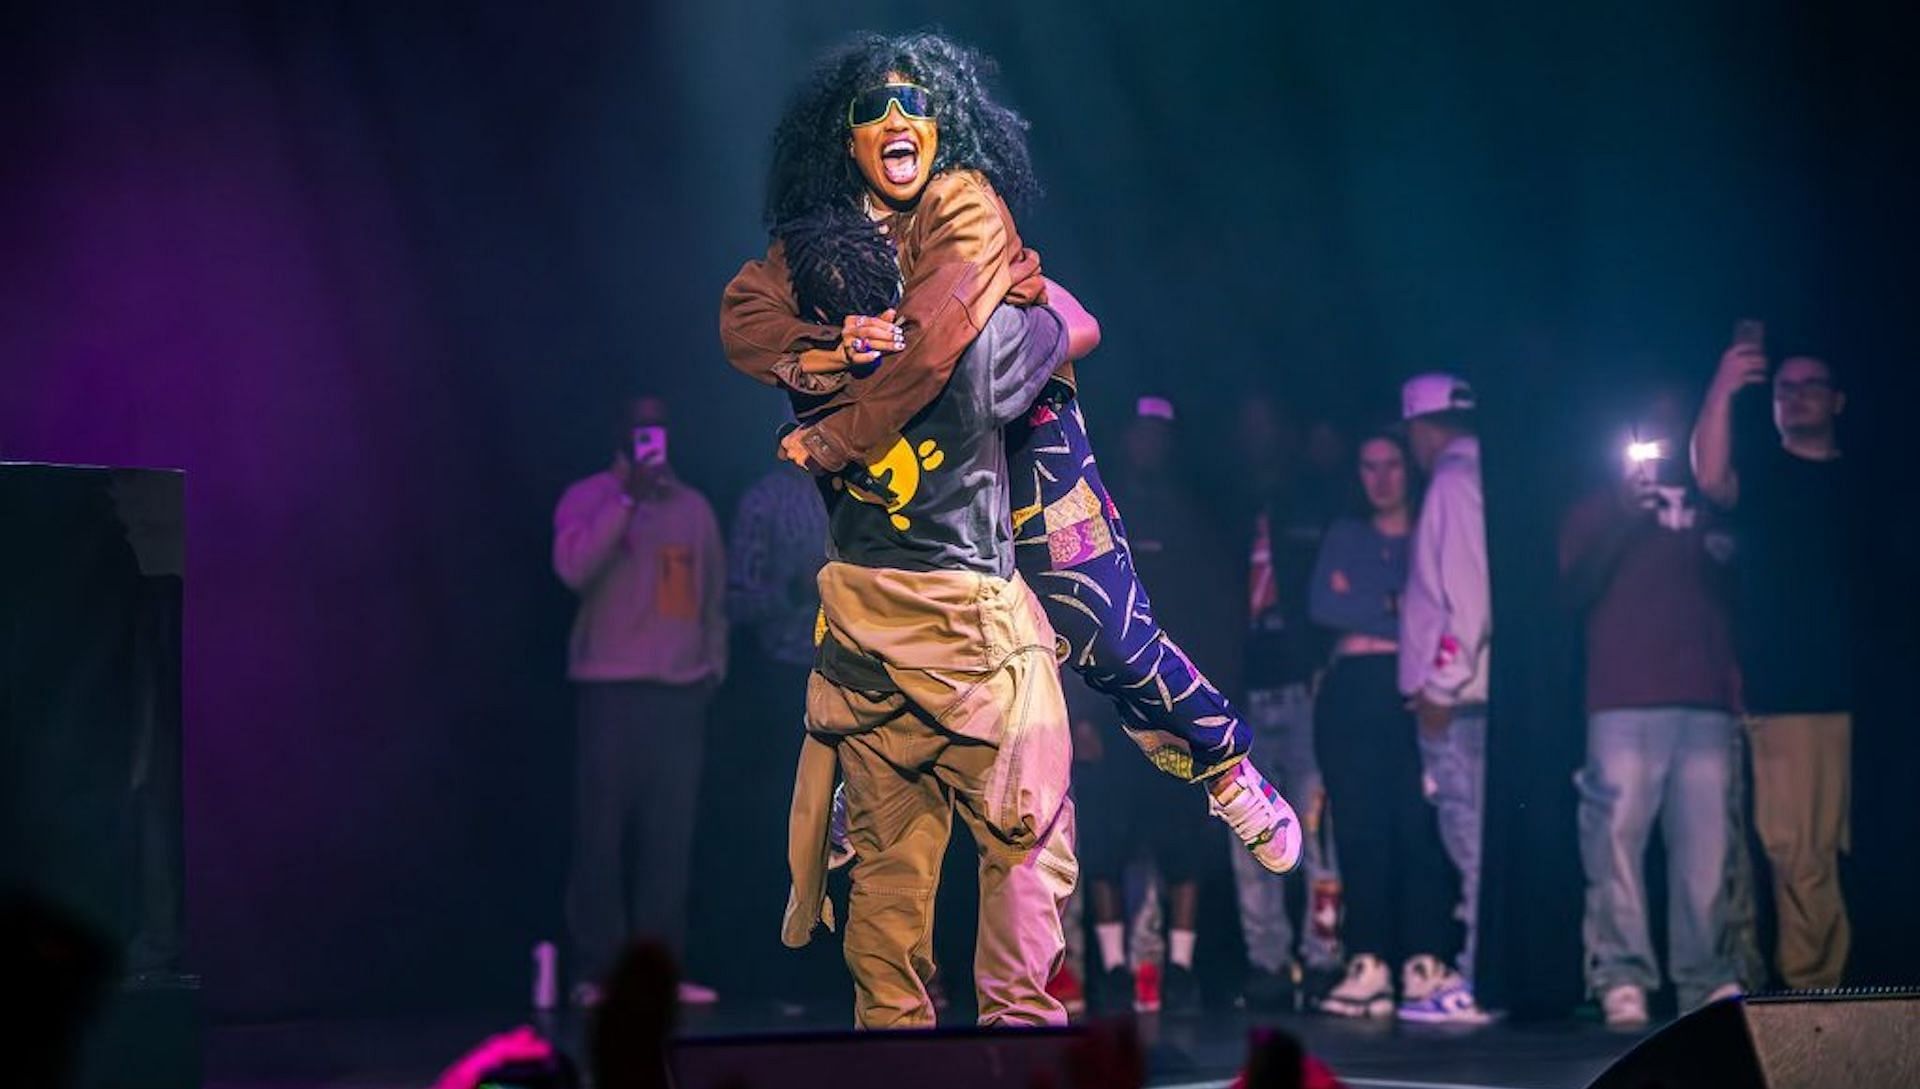 Isaiah Rashad and SZA embrace each other after their live performance at the Cilvia Demo anniversary show hosted by Top Dawg Entertainment (Image via X/ @isaiahrashad)